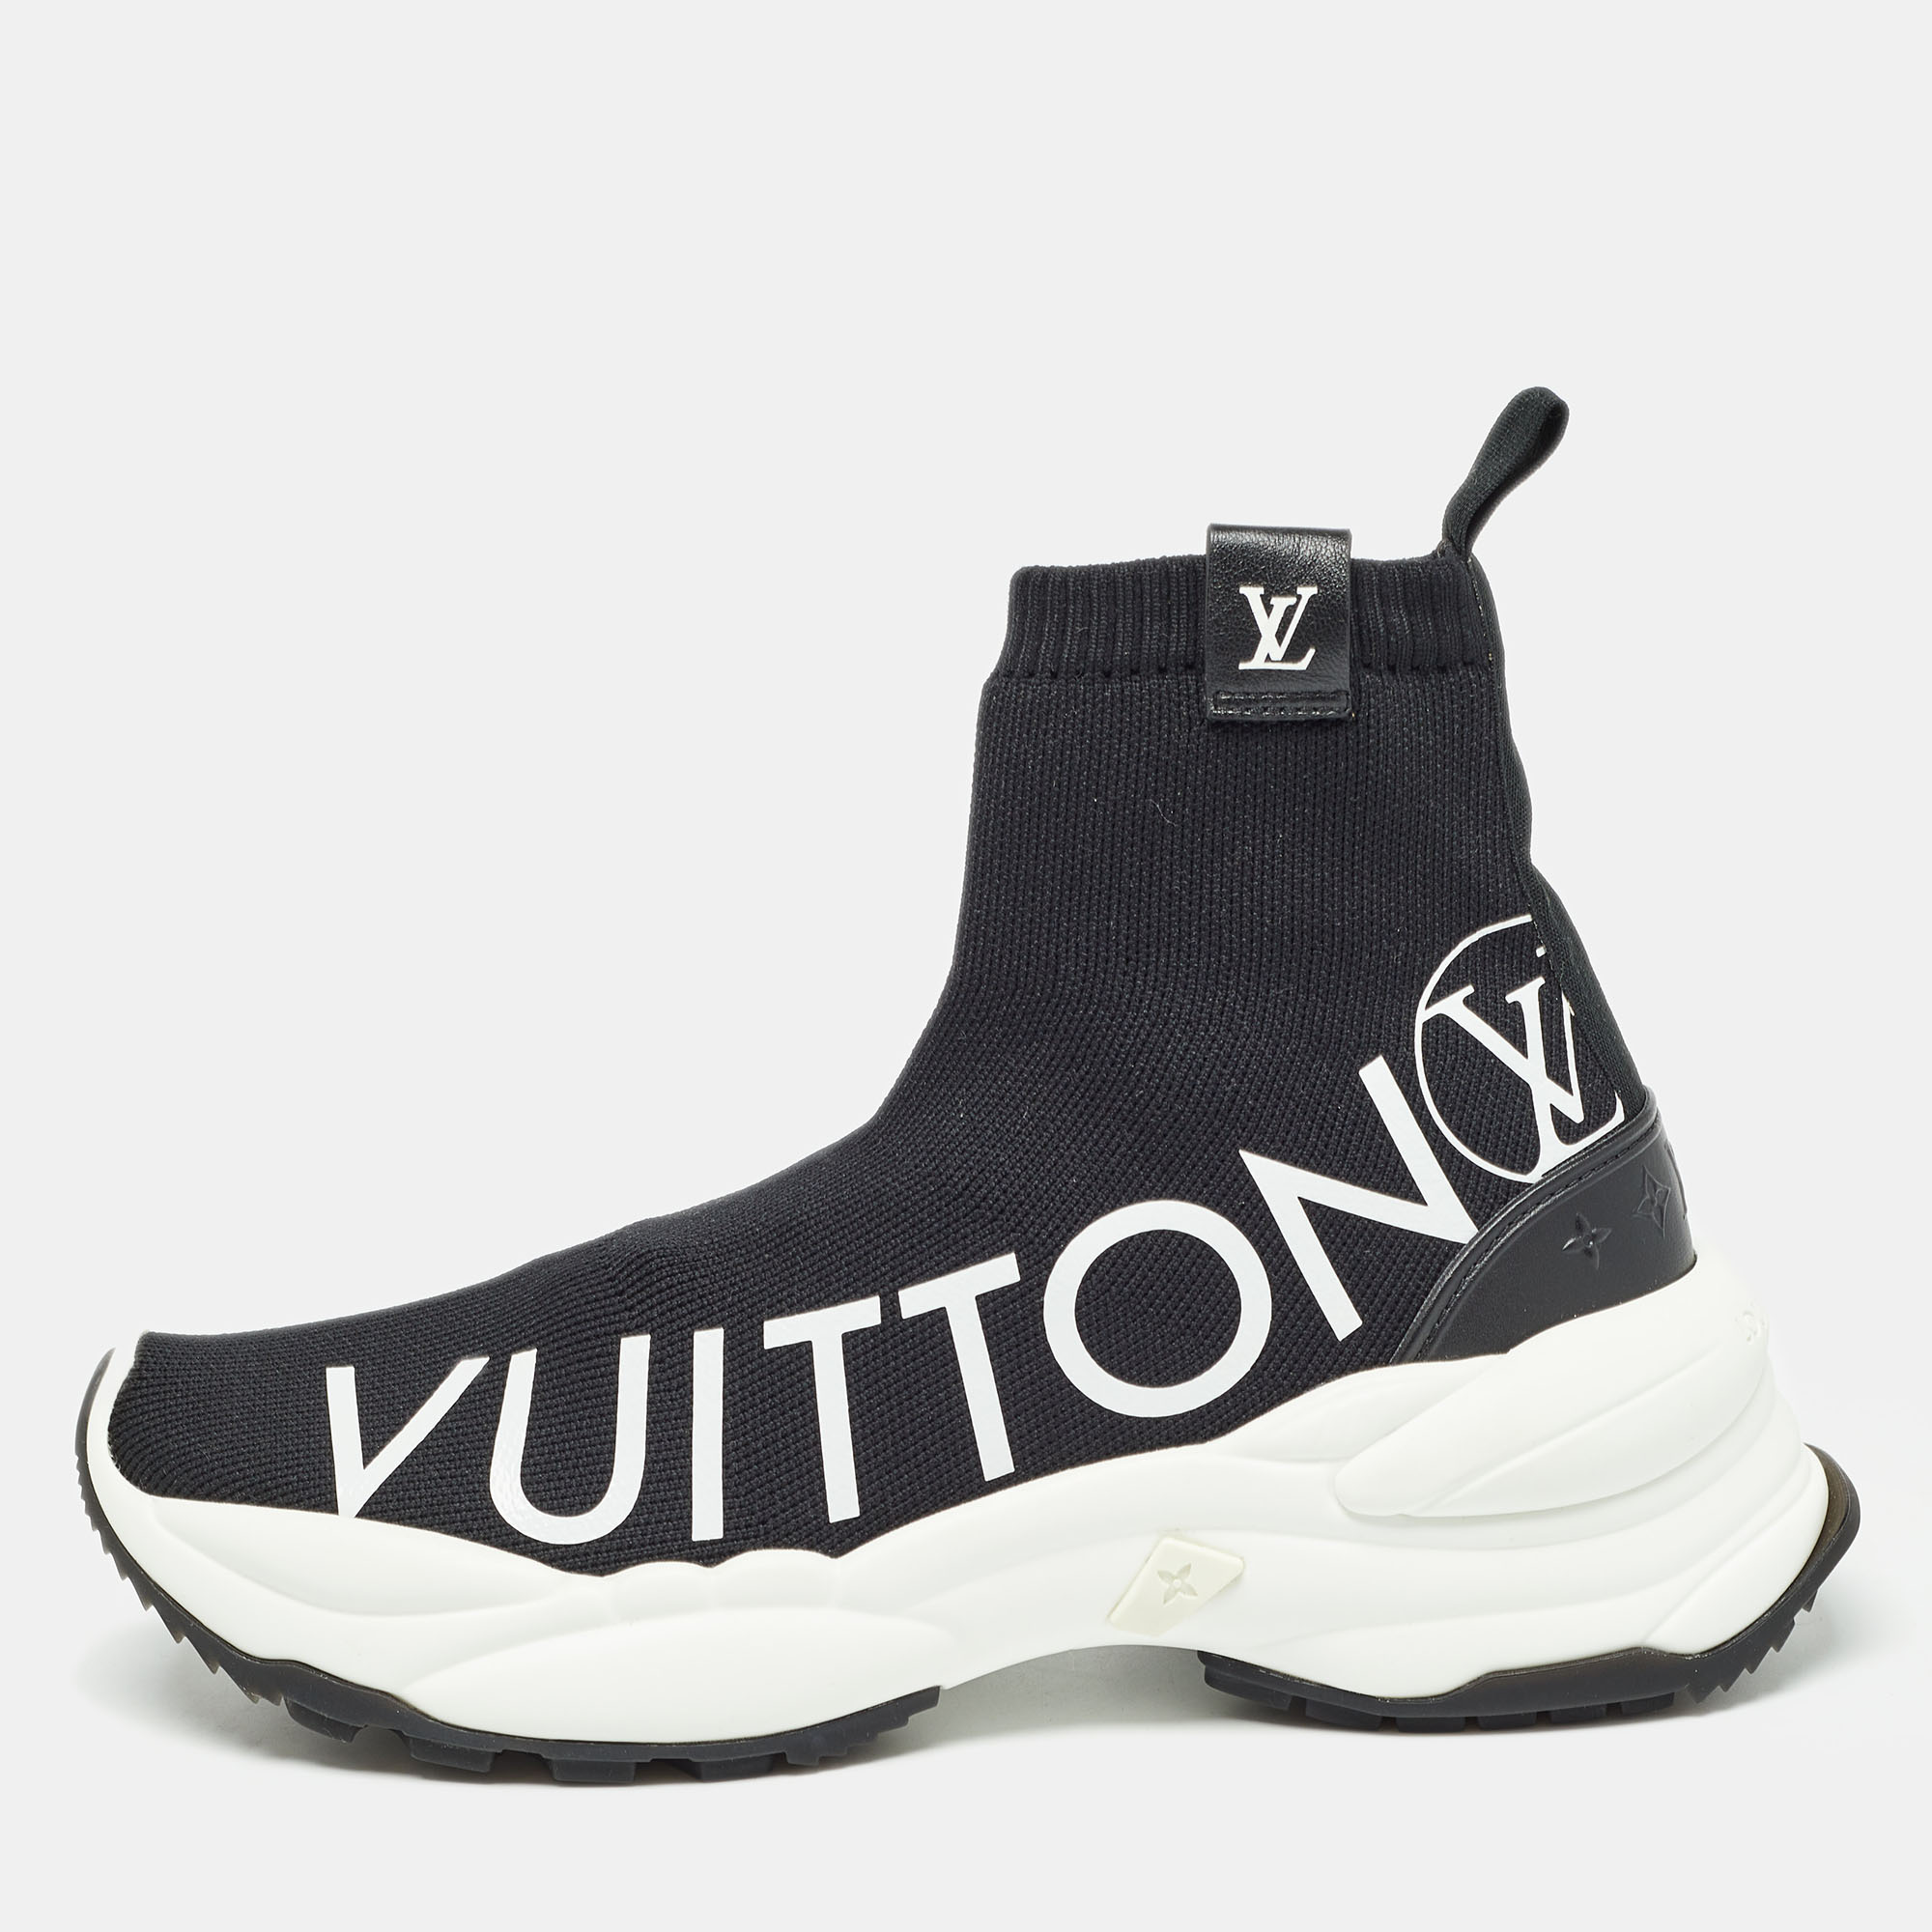 Pre-owned Louis Vuitton Black Knit Fabric Sock Sneakers Size 39